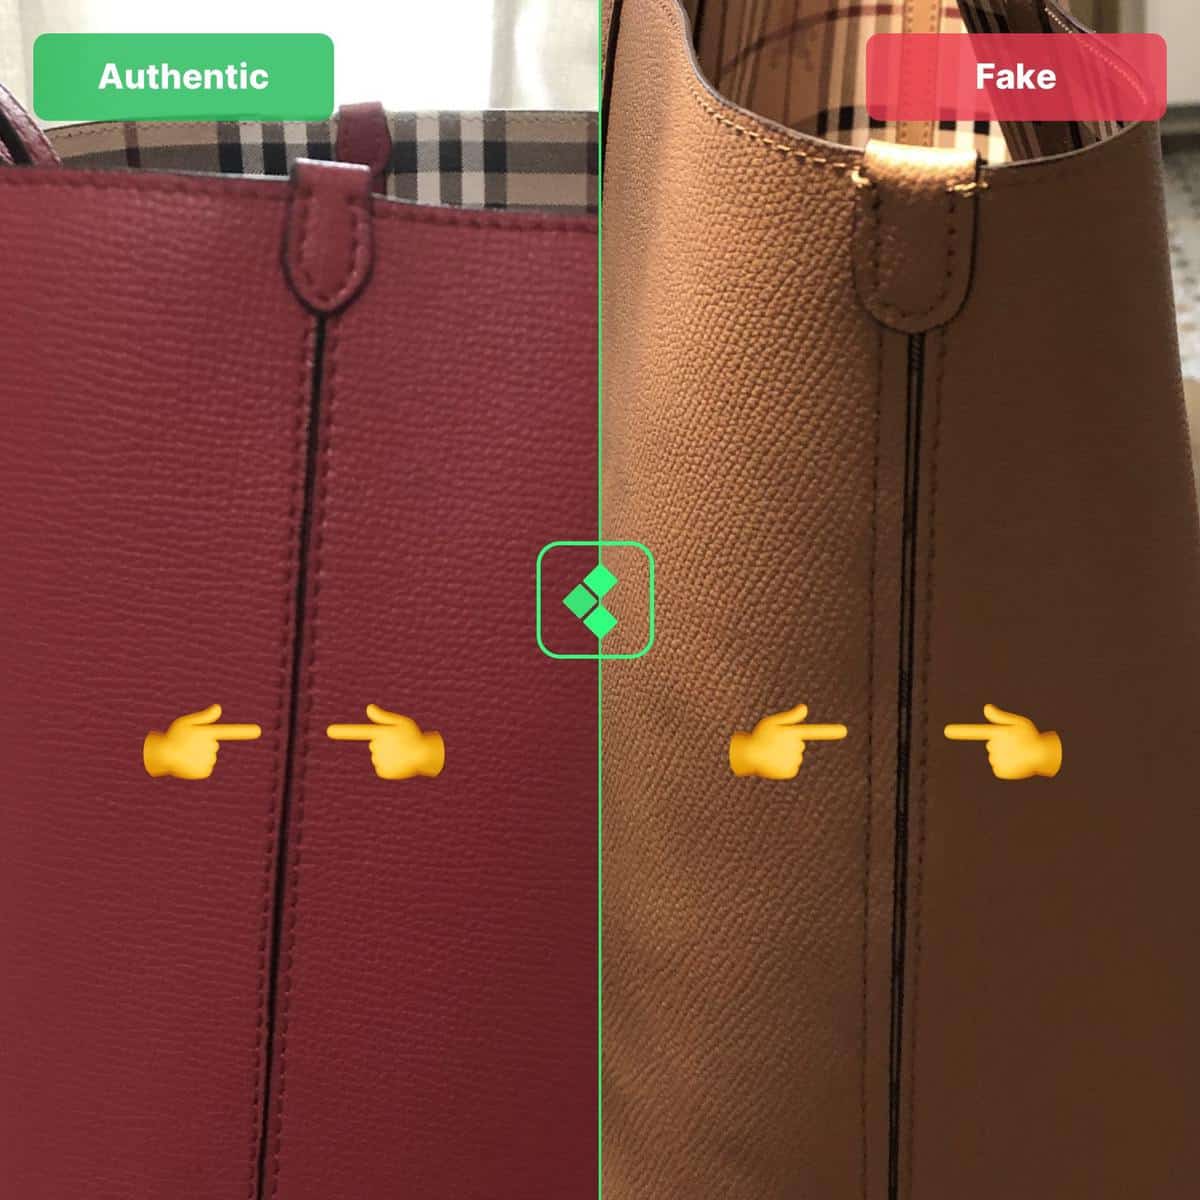 Burberry Lavenby Tote: How To Tell A Fake Bag (2023)